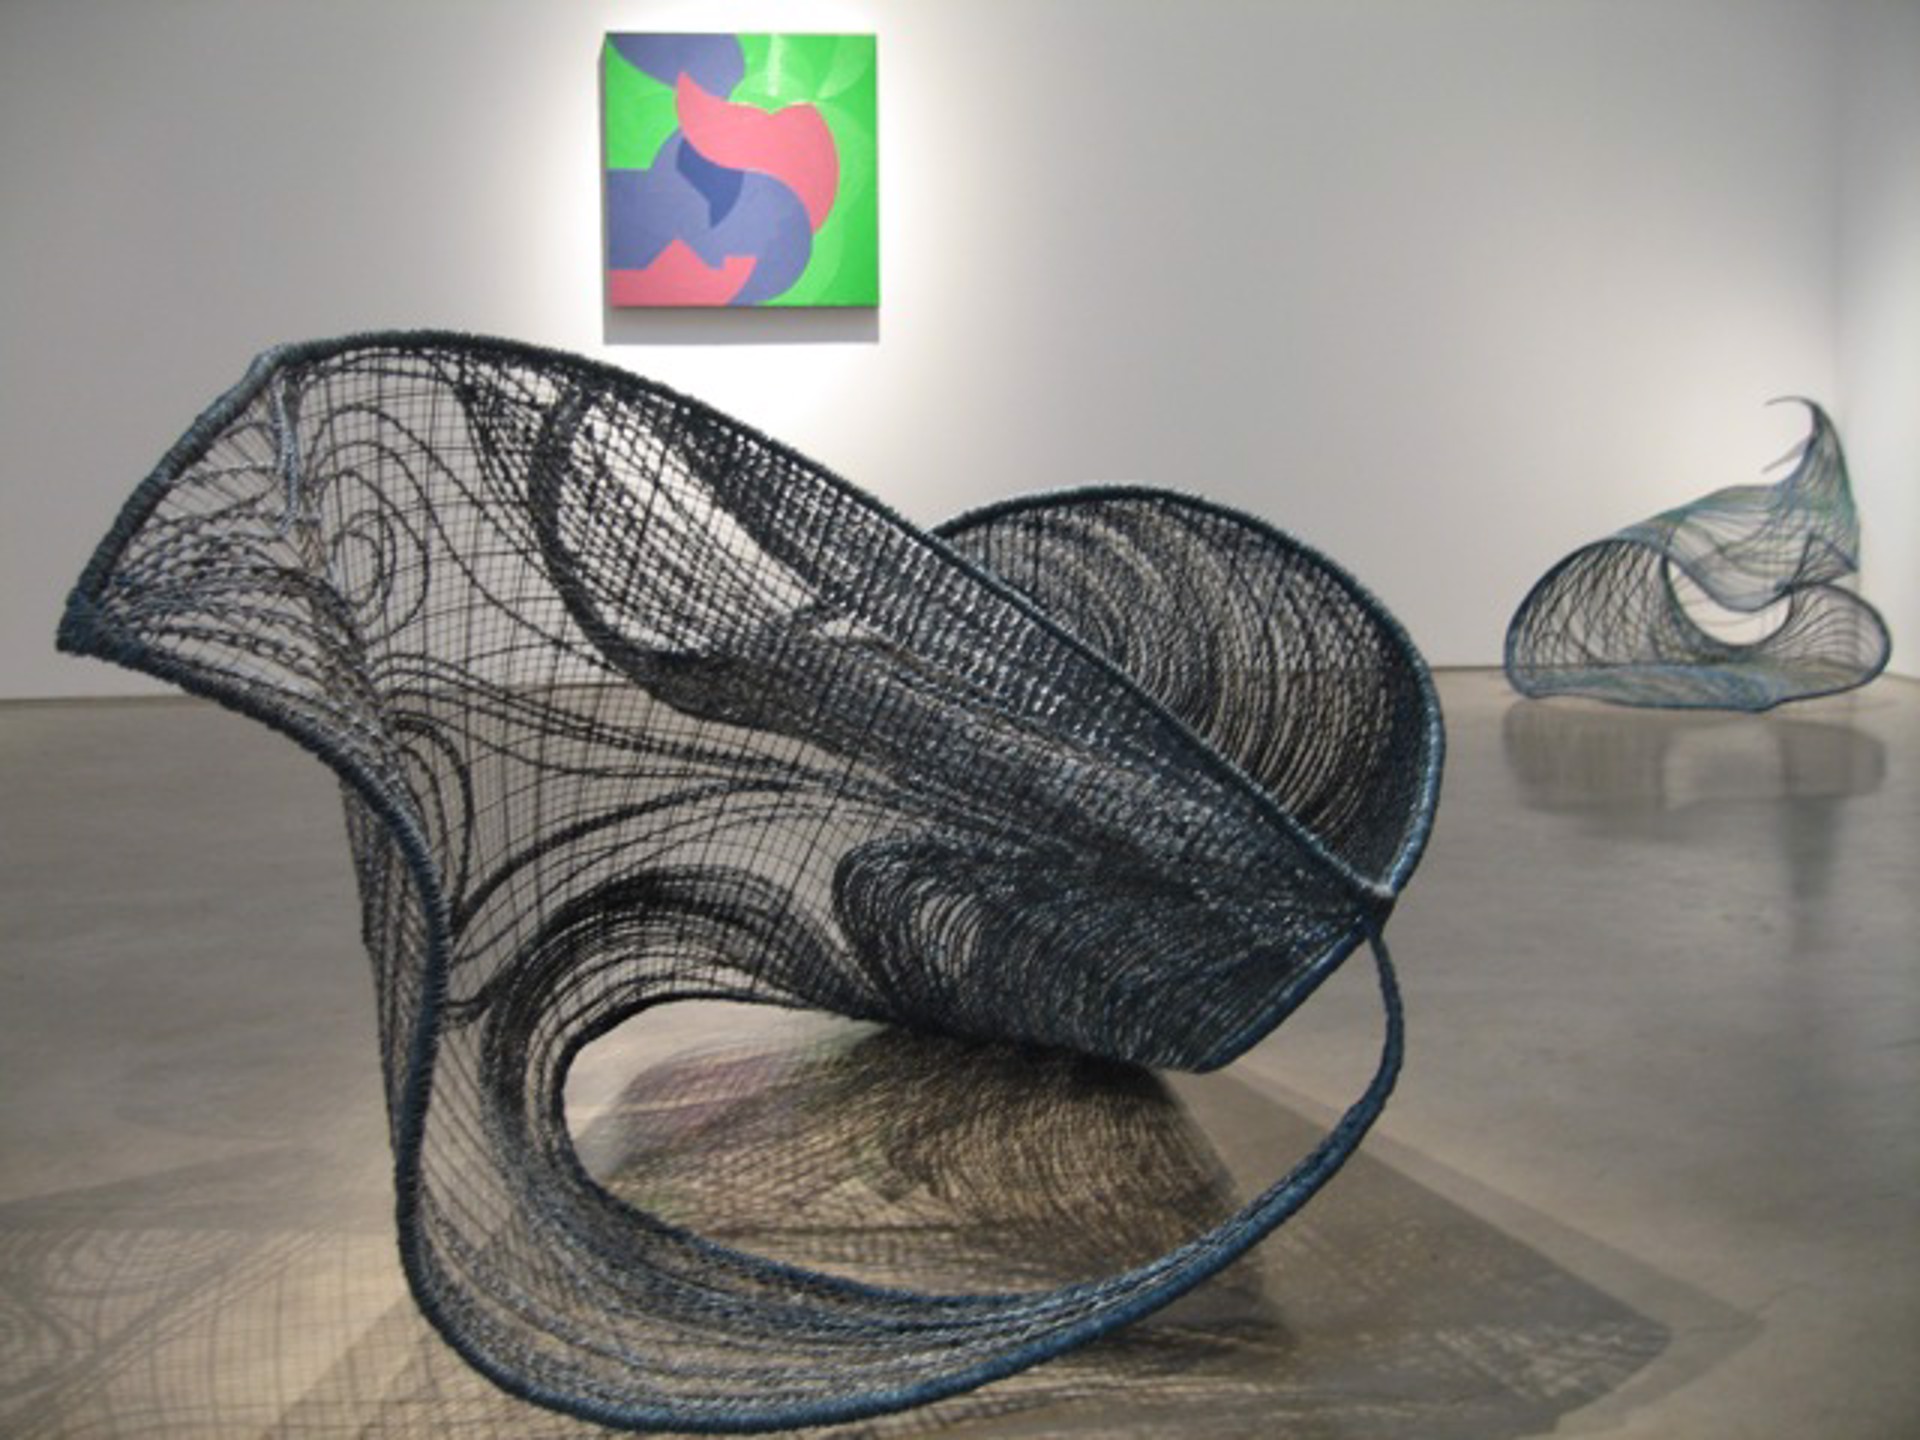 Installation: Paradigms in Paint and Wire by HJ Bott